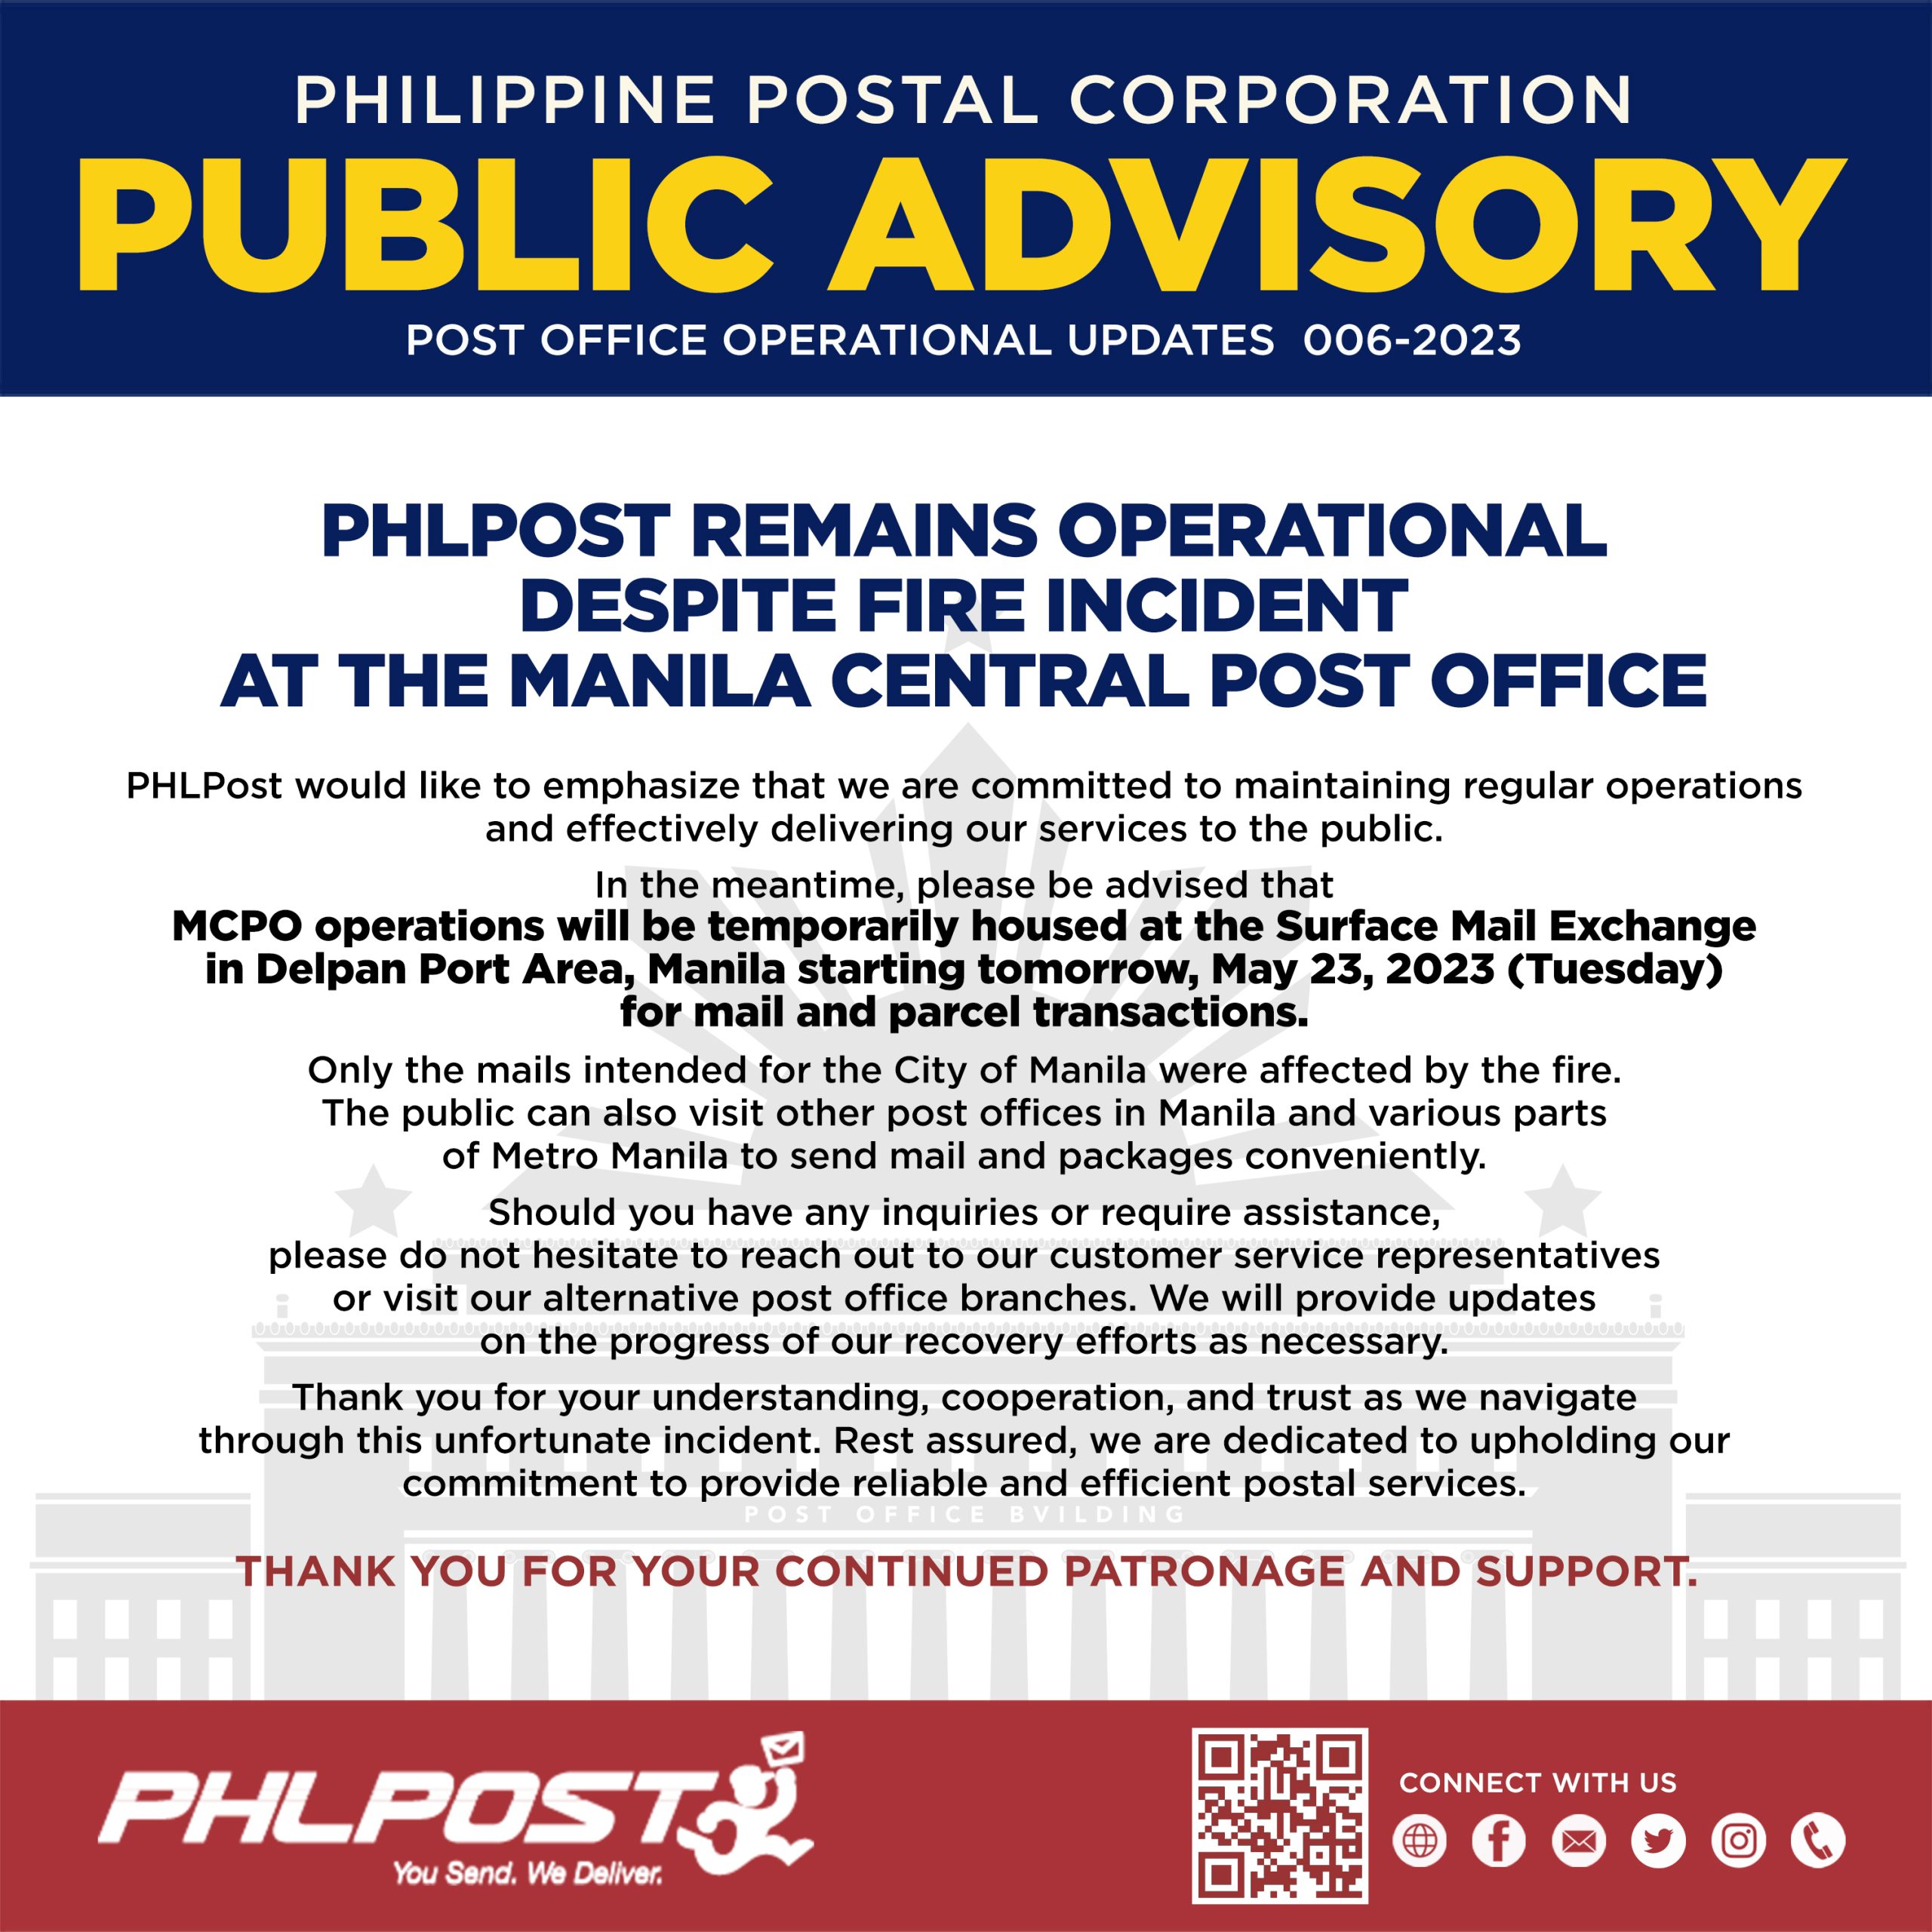 PHLPost remains operational despite fire incident at the Manila Central Post Office